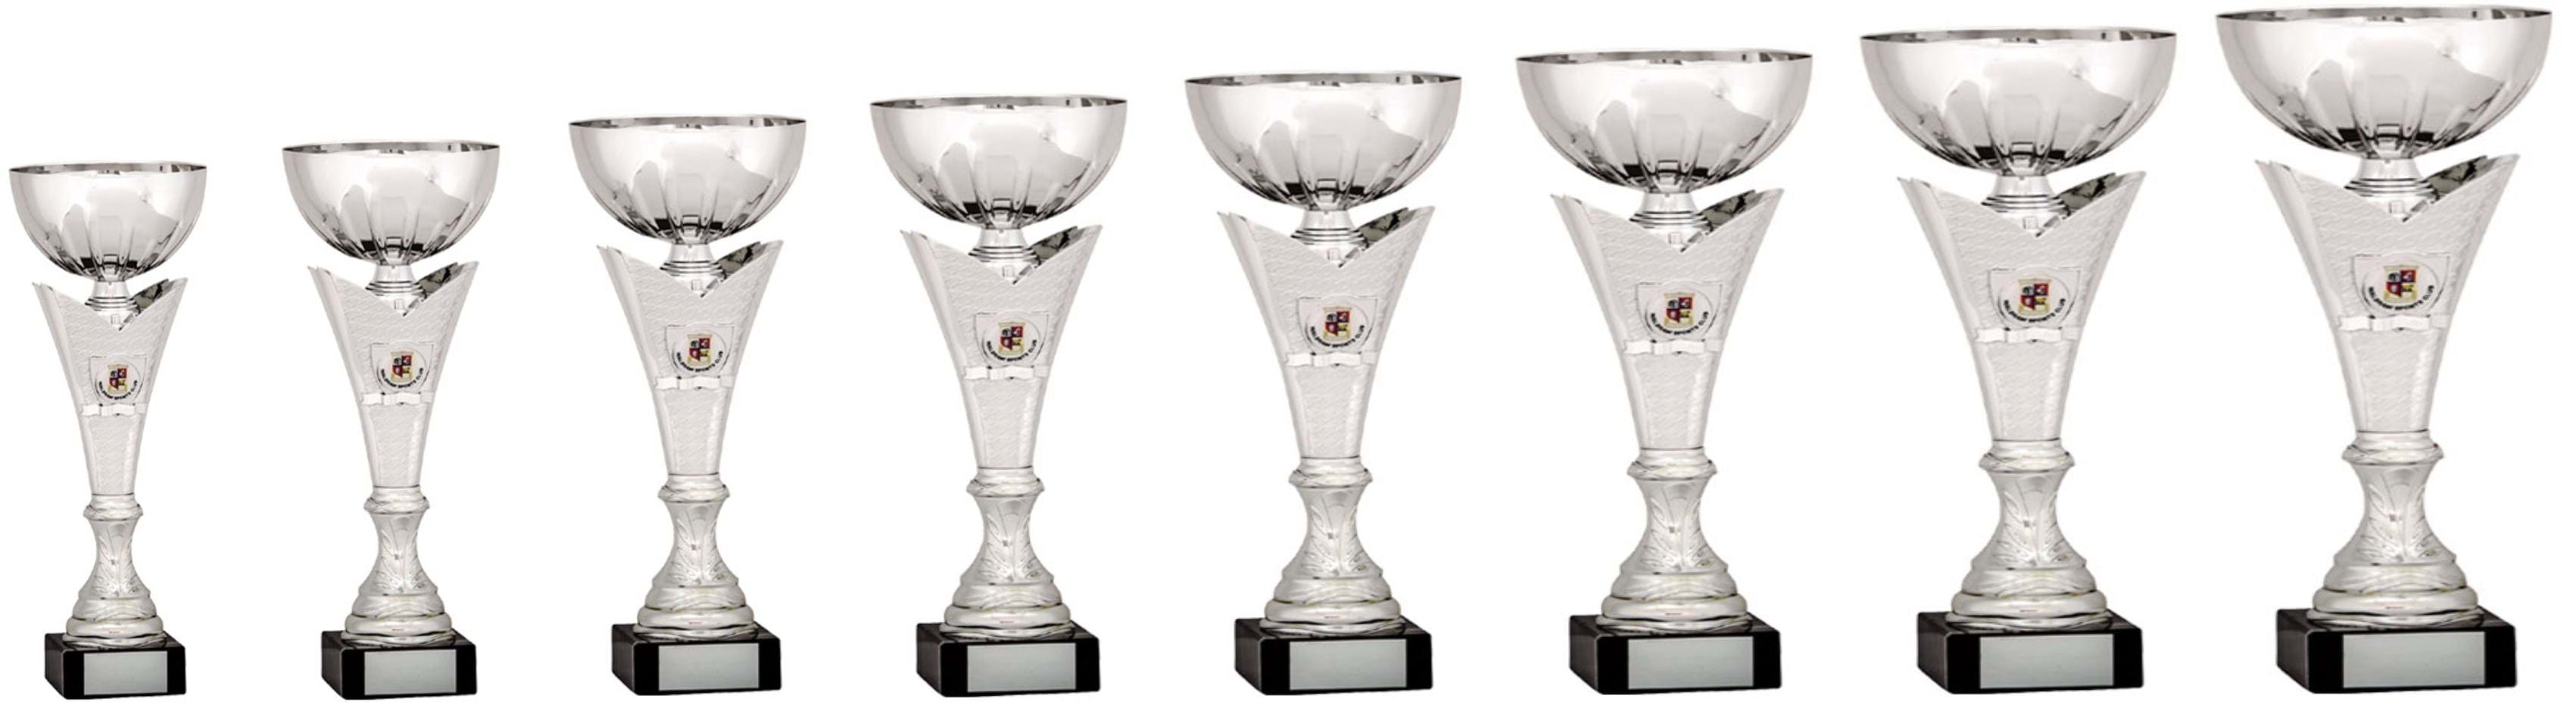 Silver Cup Trophy 1917 Series